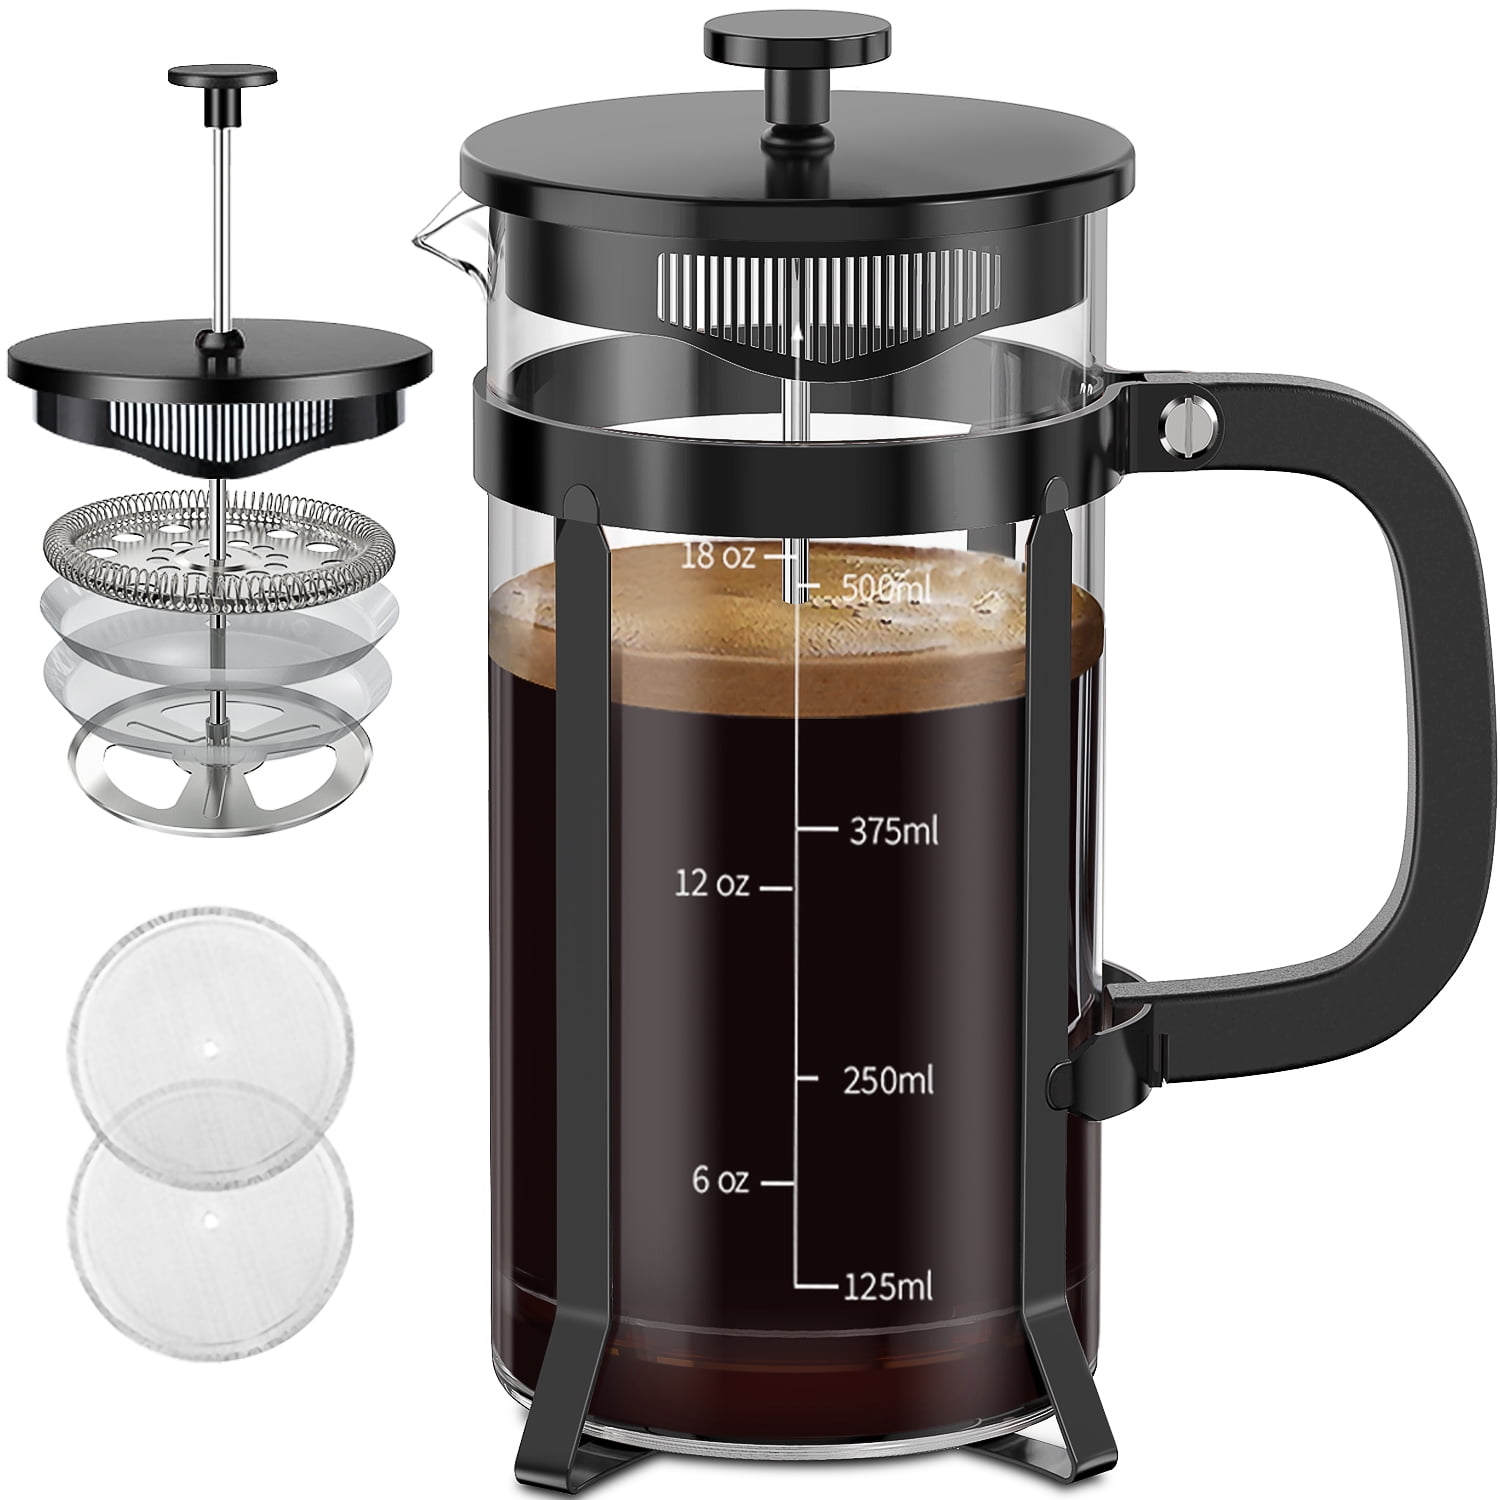 QUQIYSO French Press Coffee Maker, 21 Ounce, 304 Stainless